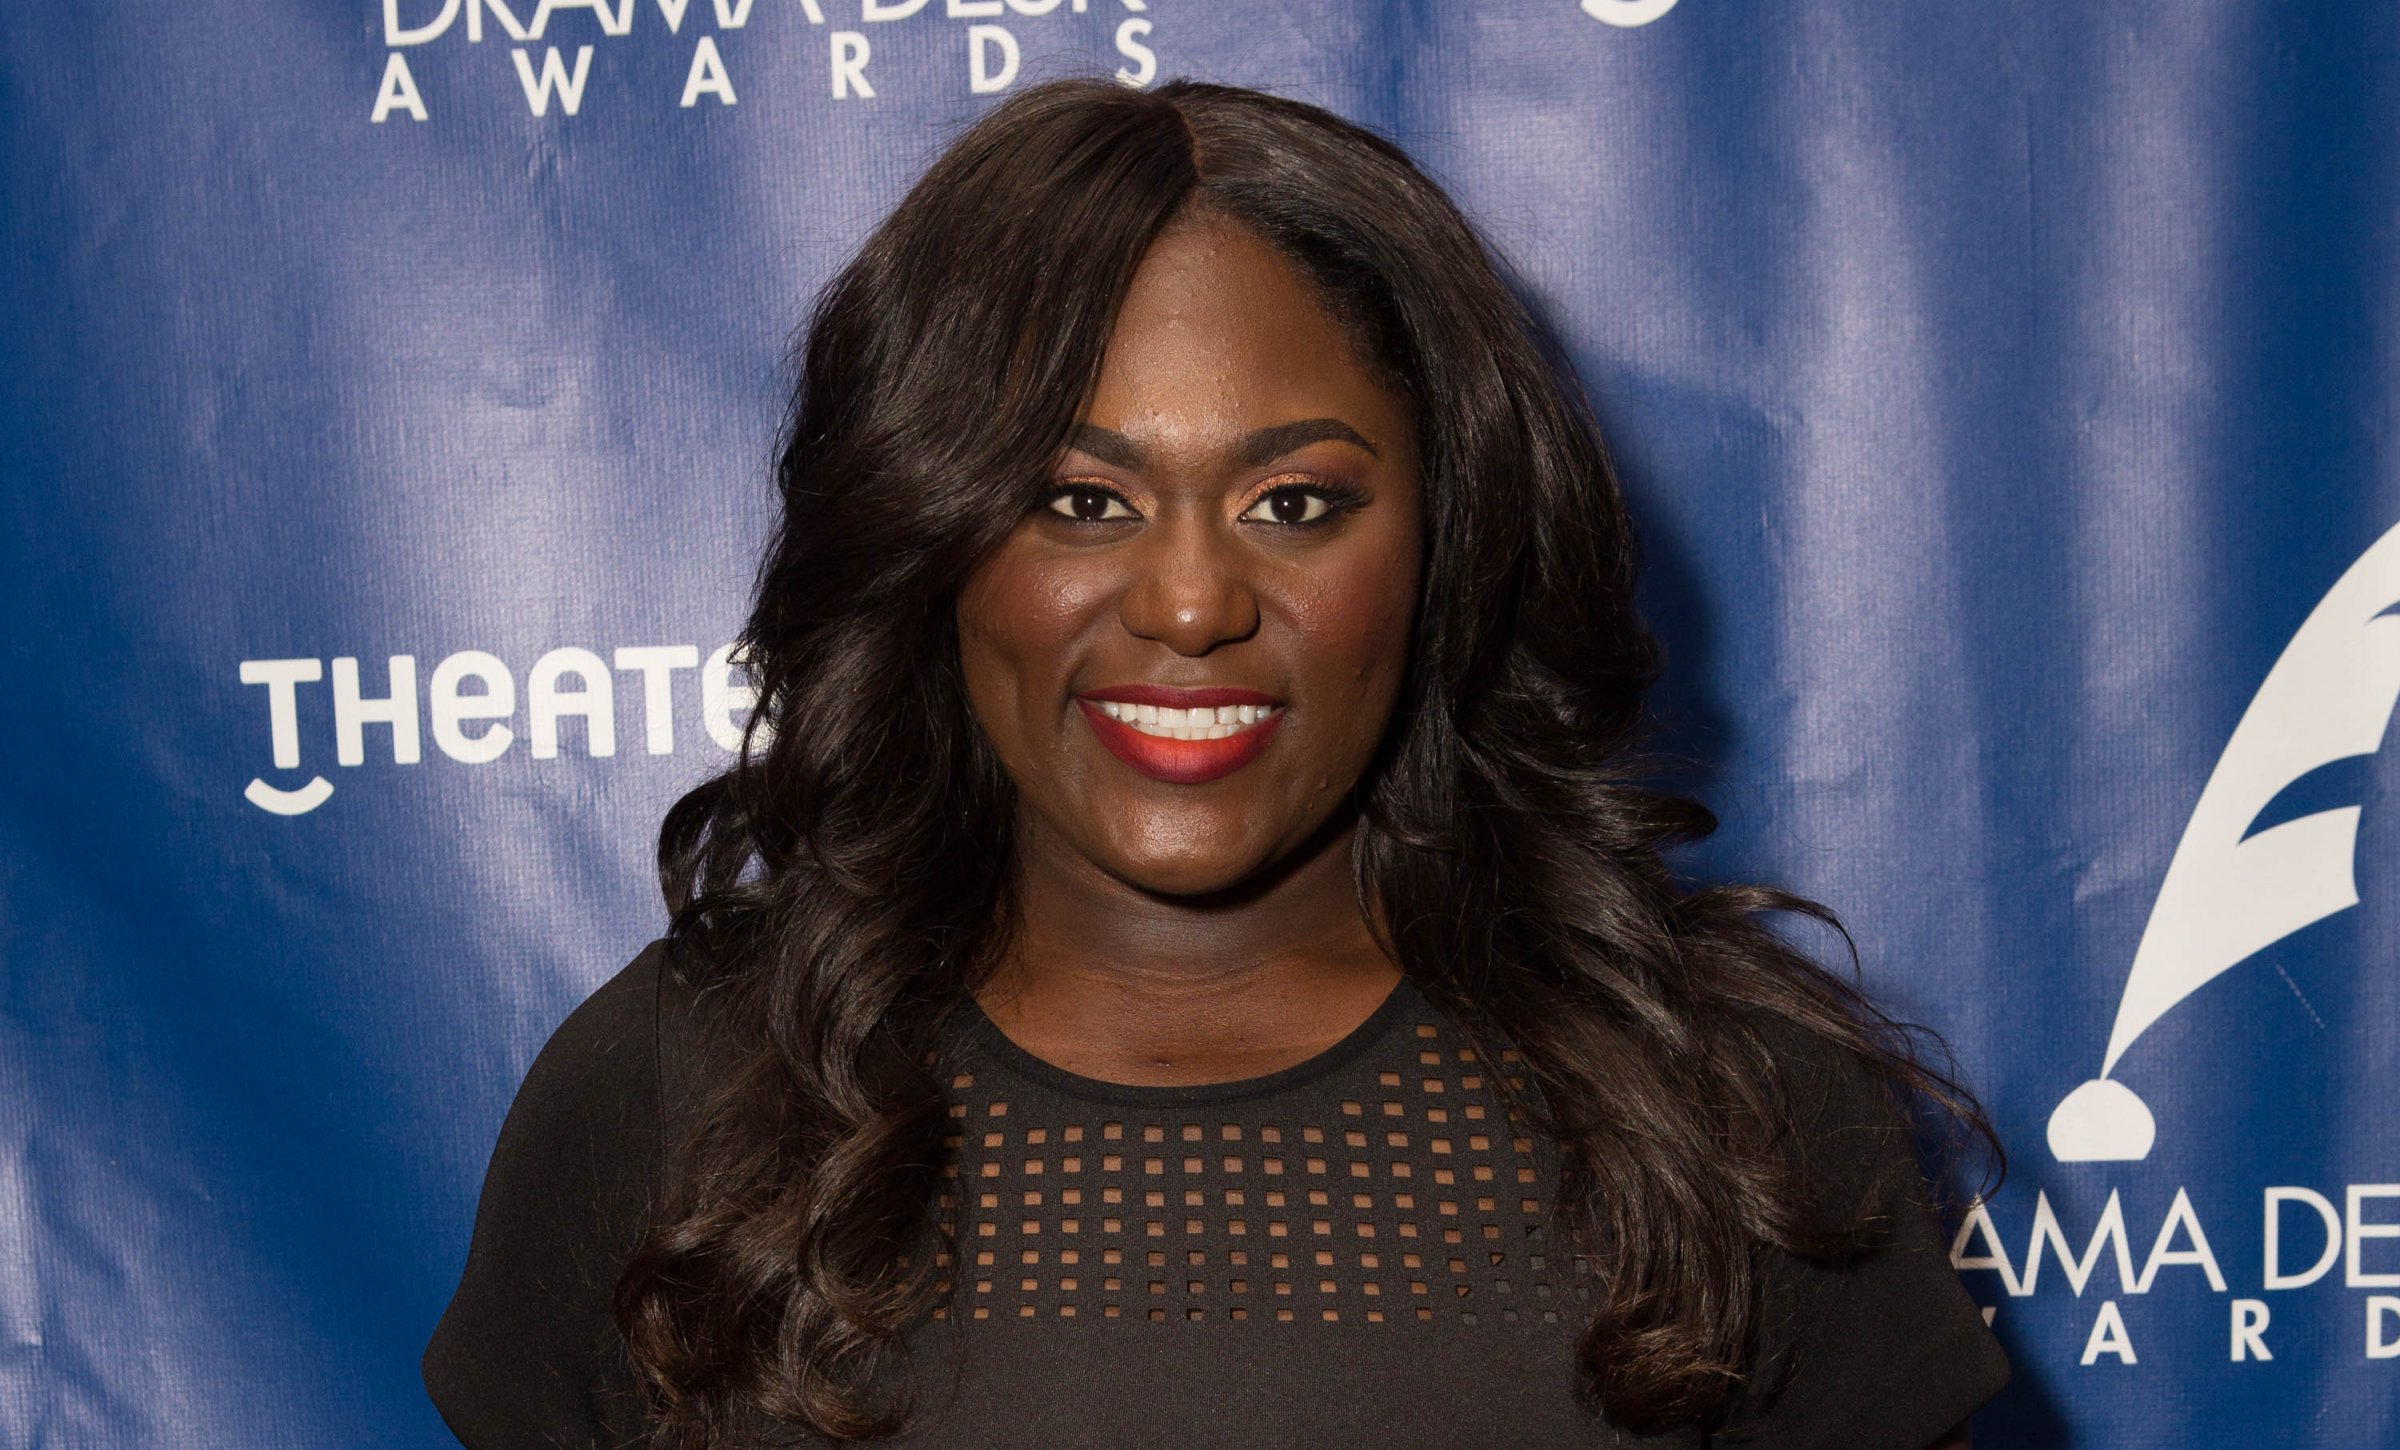 Actress Danielle Brooks attends the 2016 Drama Desk Awards Nominees Reception at The New York Marriott Marquis on May 11, 2016 in New York City.